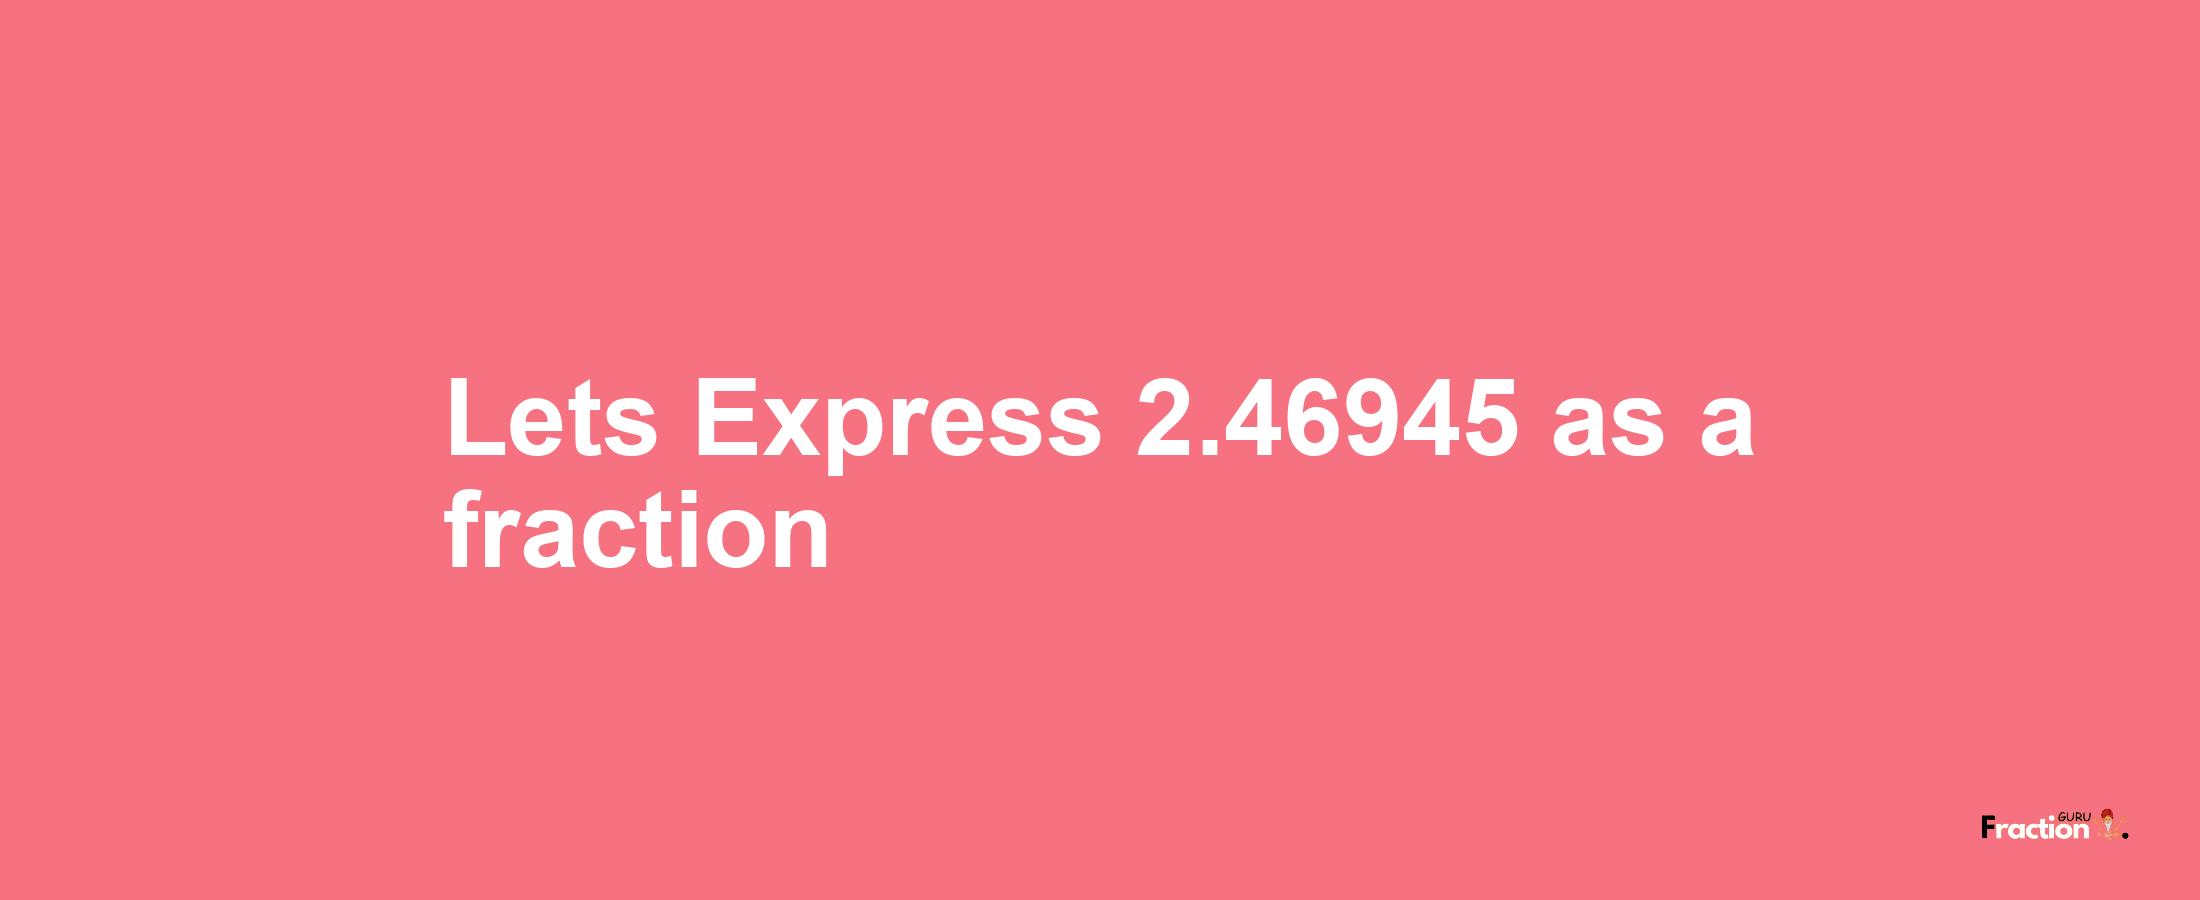 Lets Express 2.46945 as afraction